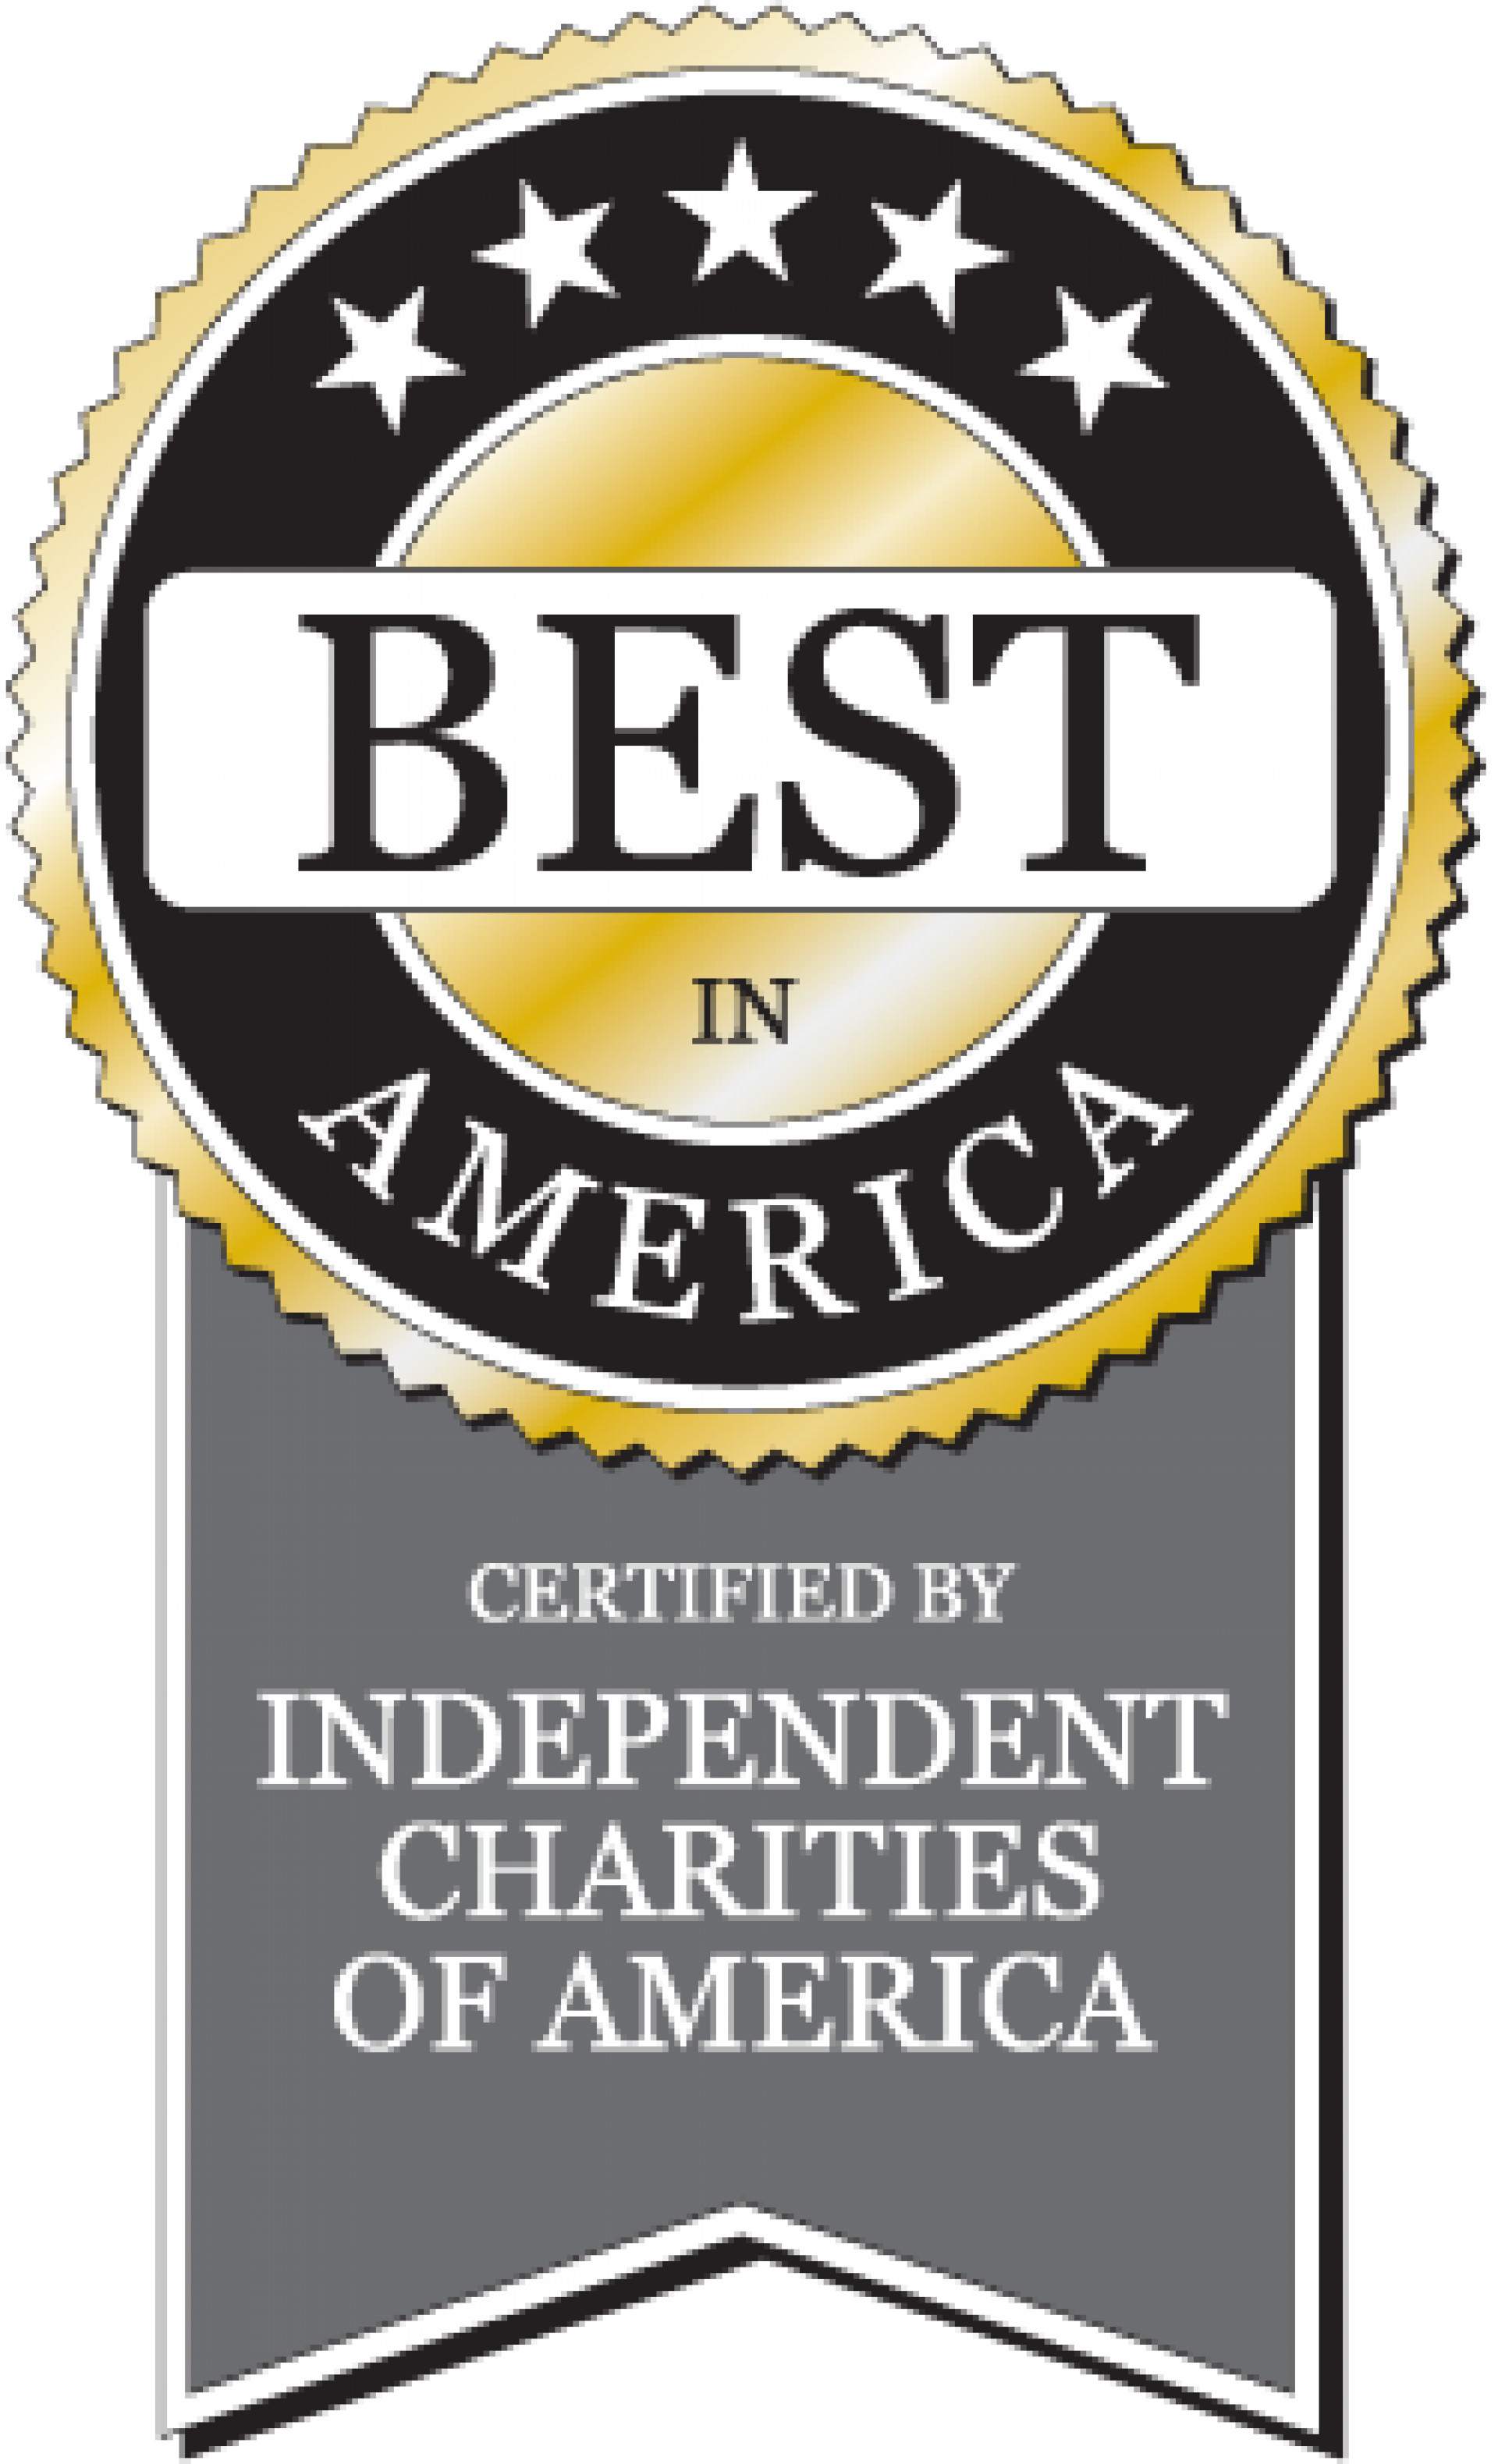 1920x3159 Certified by Independent Charities of America. Guidestar Gold Participant